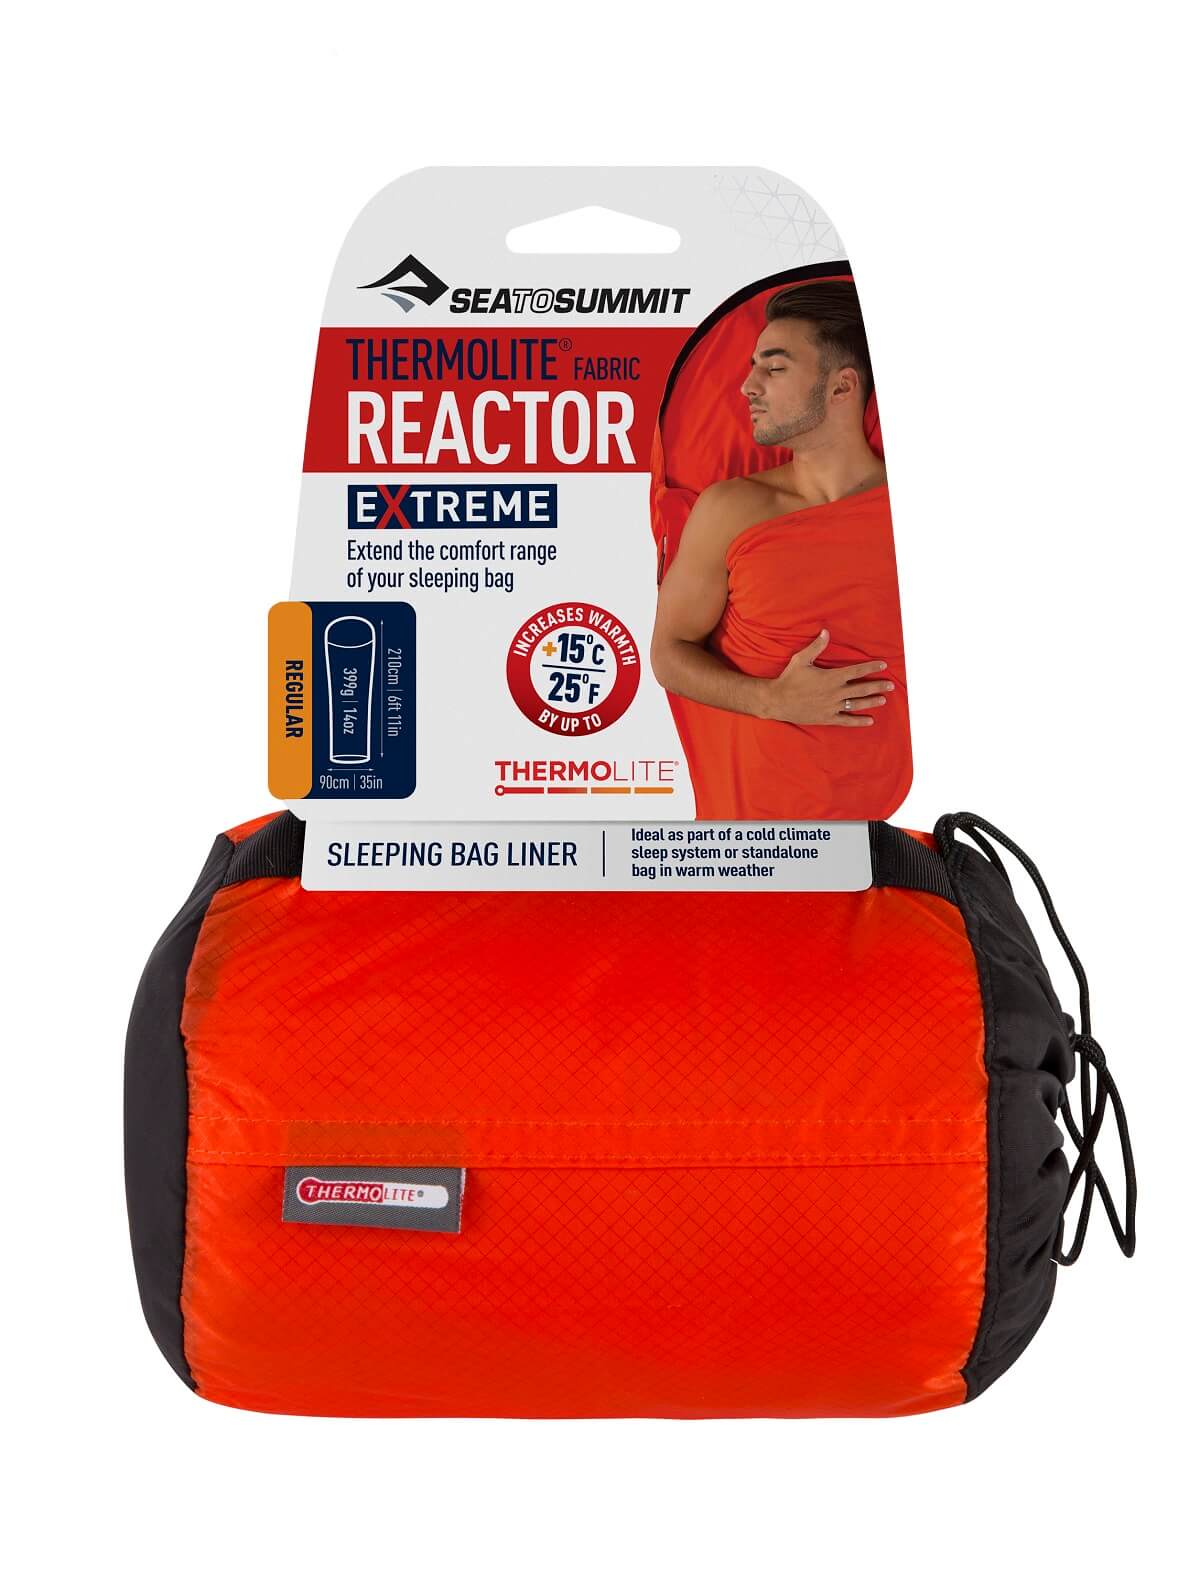 Sea To Summit Reactor Extreme Thermolite Mummy Liner